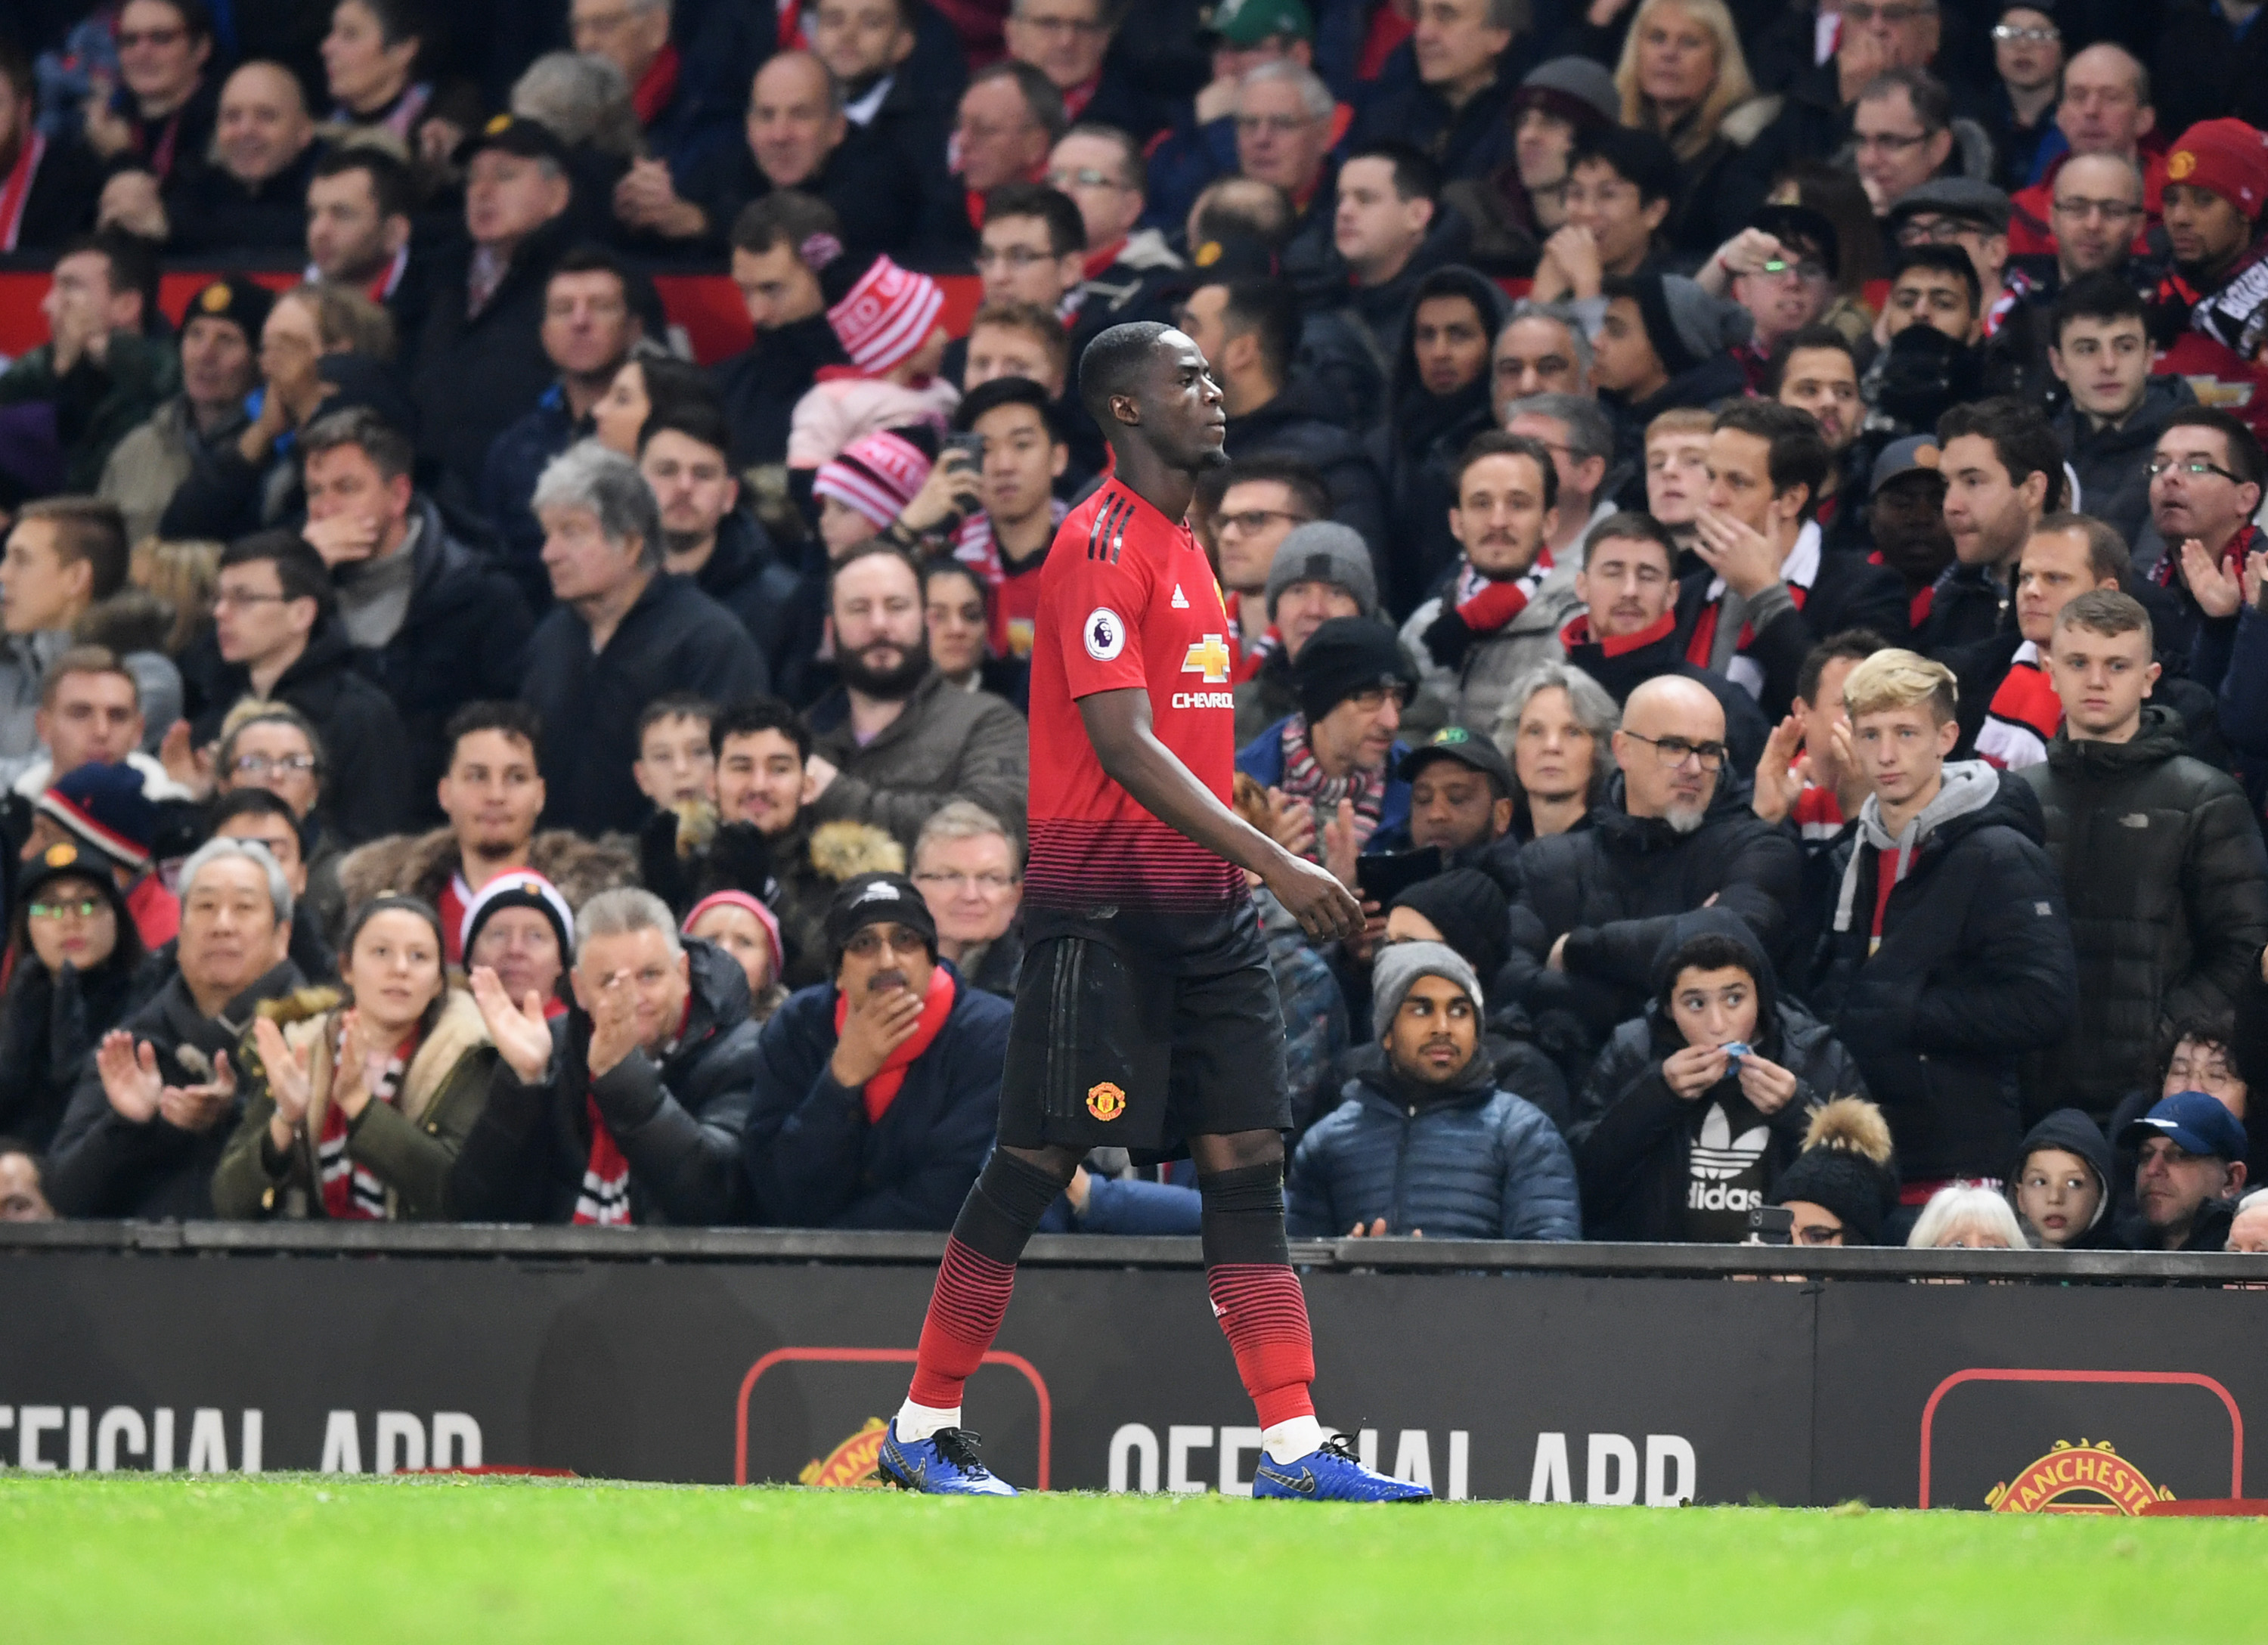 MANCHESTER, ENGLAND - DECEMBER 30:  Eric Bailly of Manchester United (3) is shown a red card and is sent off during the Premier League match between Manchester United and AFC Bournemouth at Old Trafford on December 30, 2018 in Manchester, United Kingdom.  (Photo by Michael Regan/Getty Images)